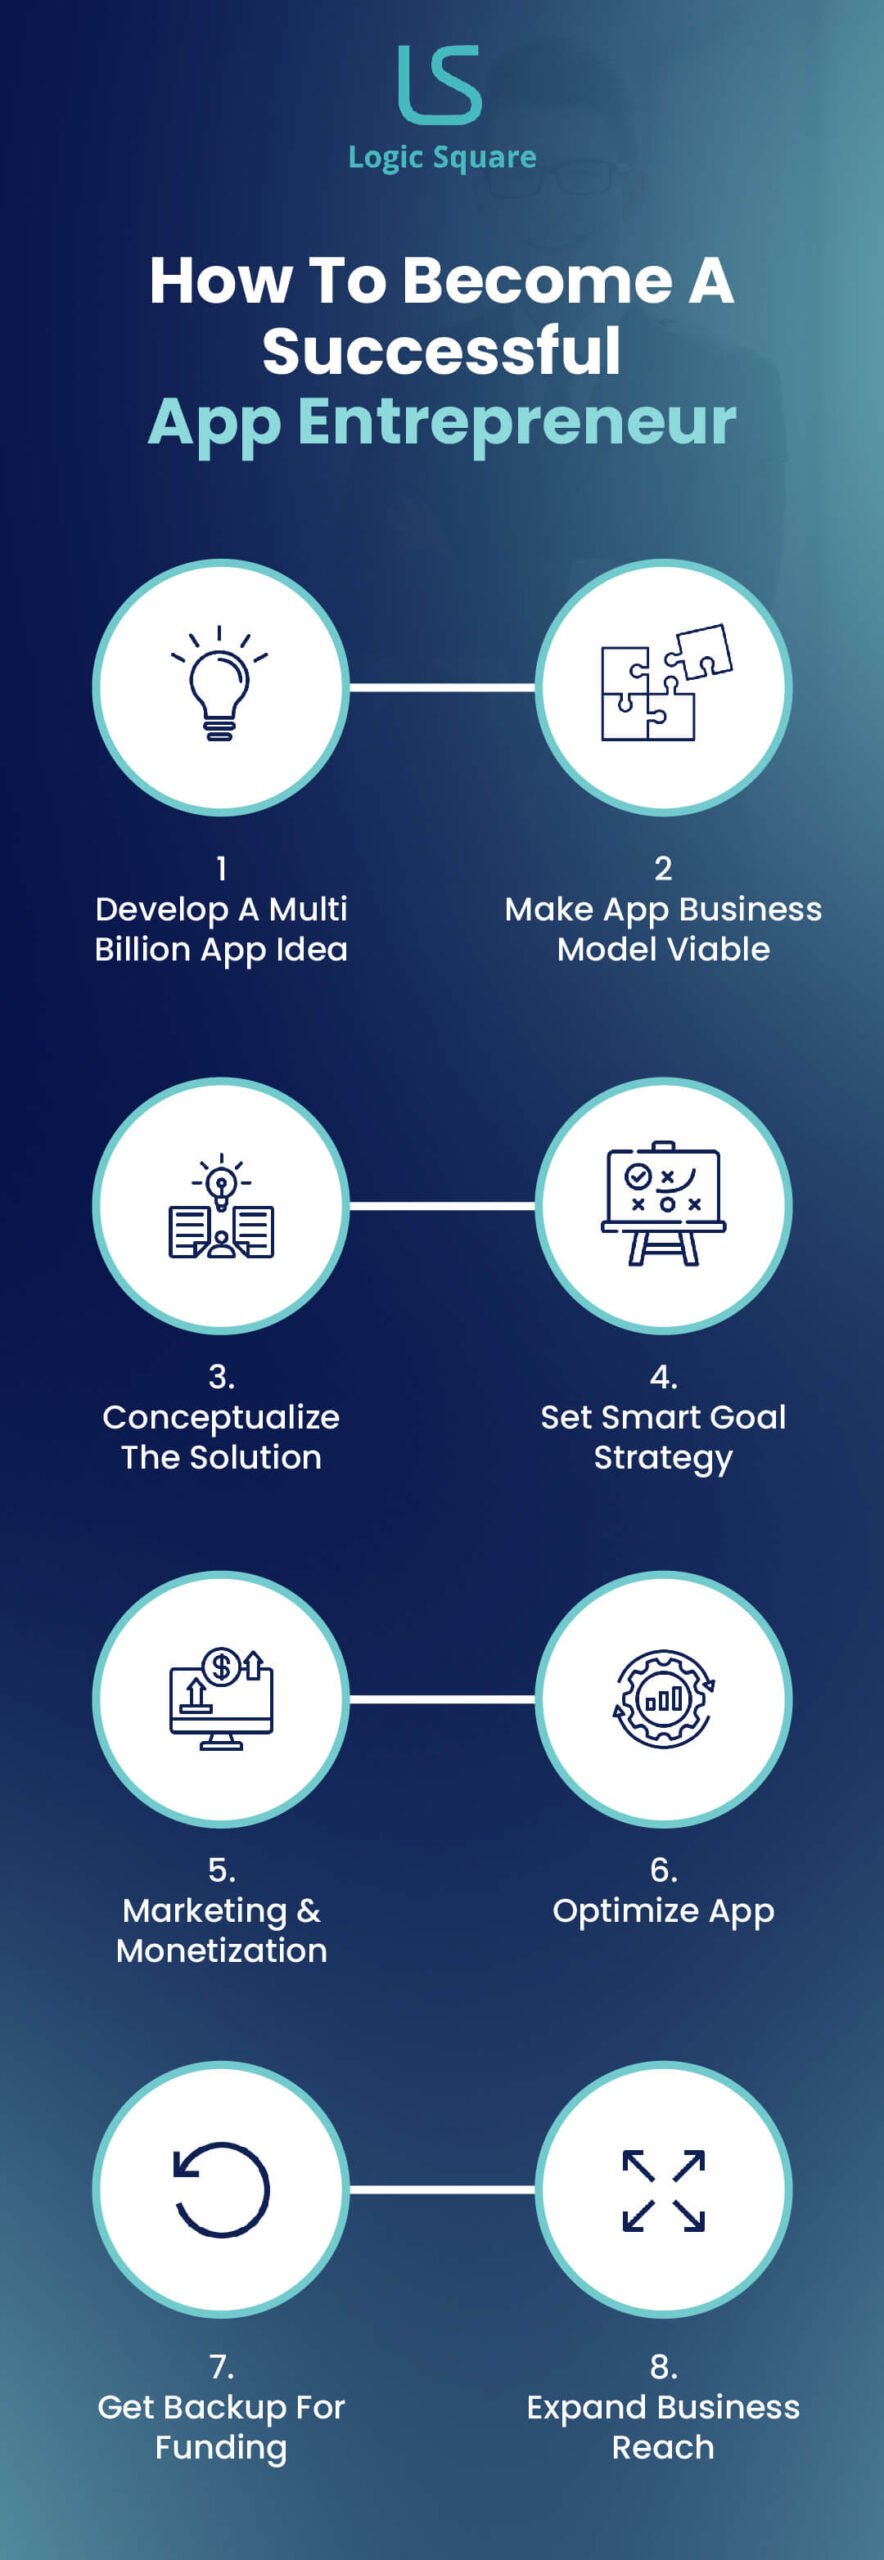 How To Become A Successful App Entrepreneur